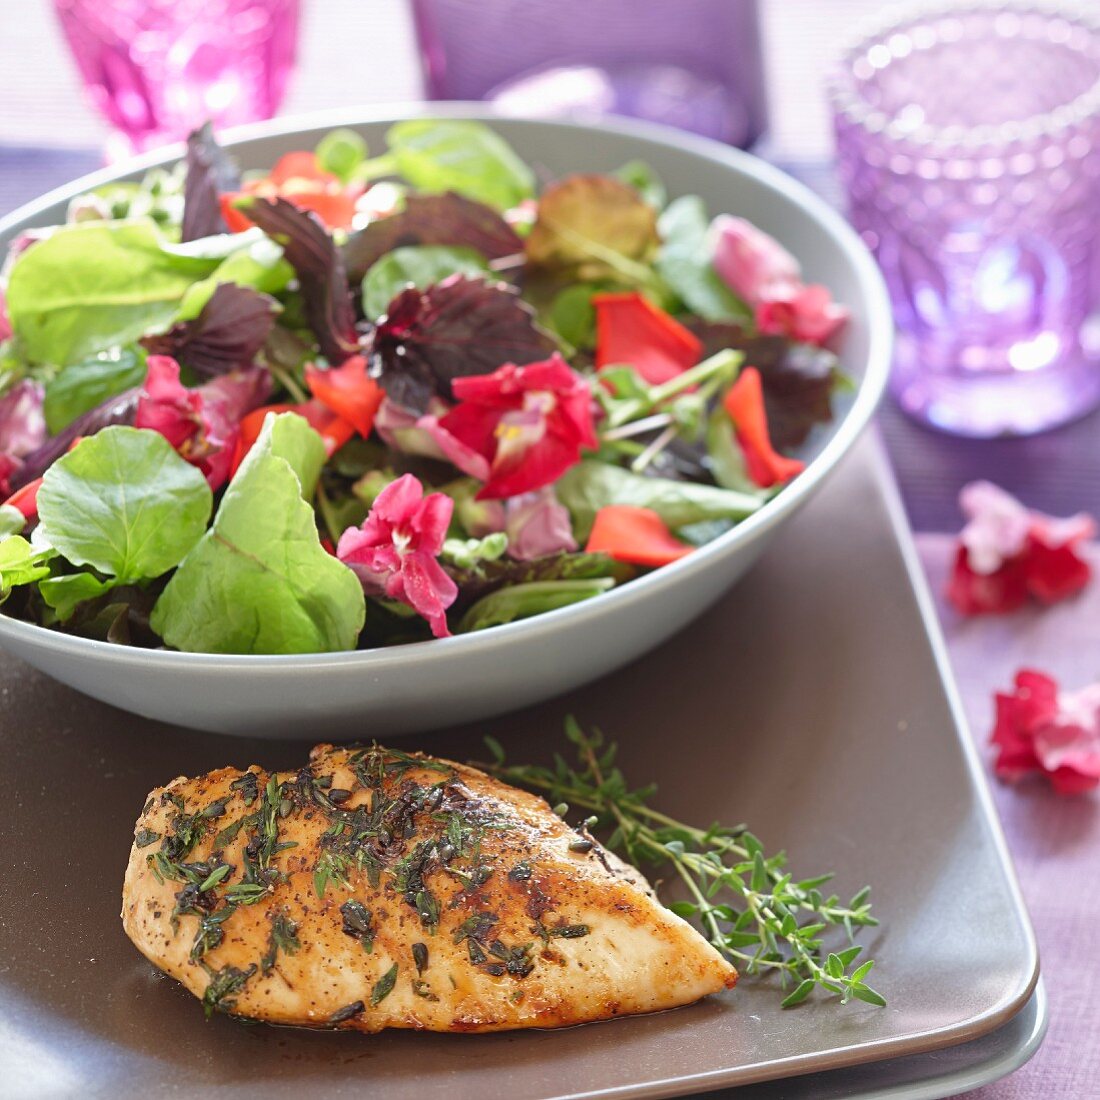 Grilled chicken breast with a mixed salad